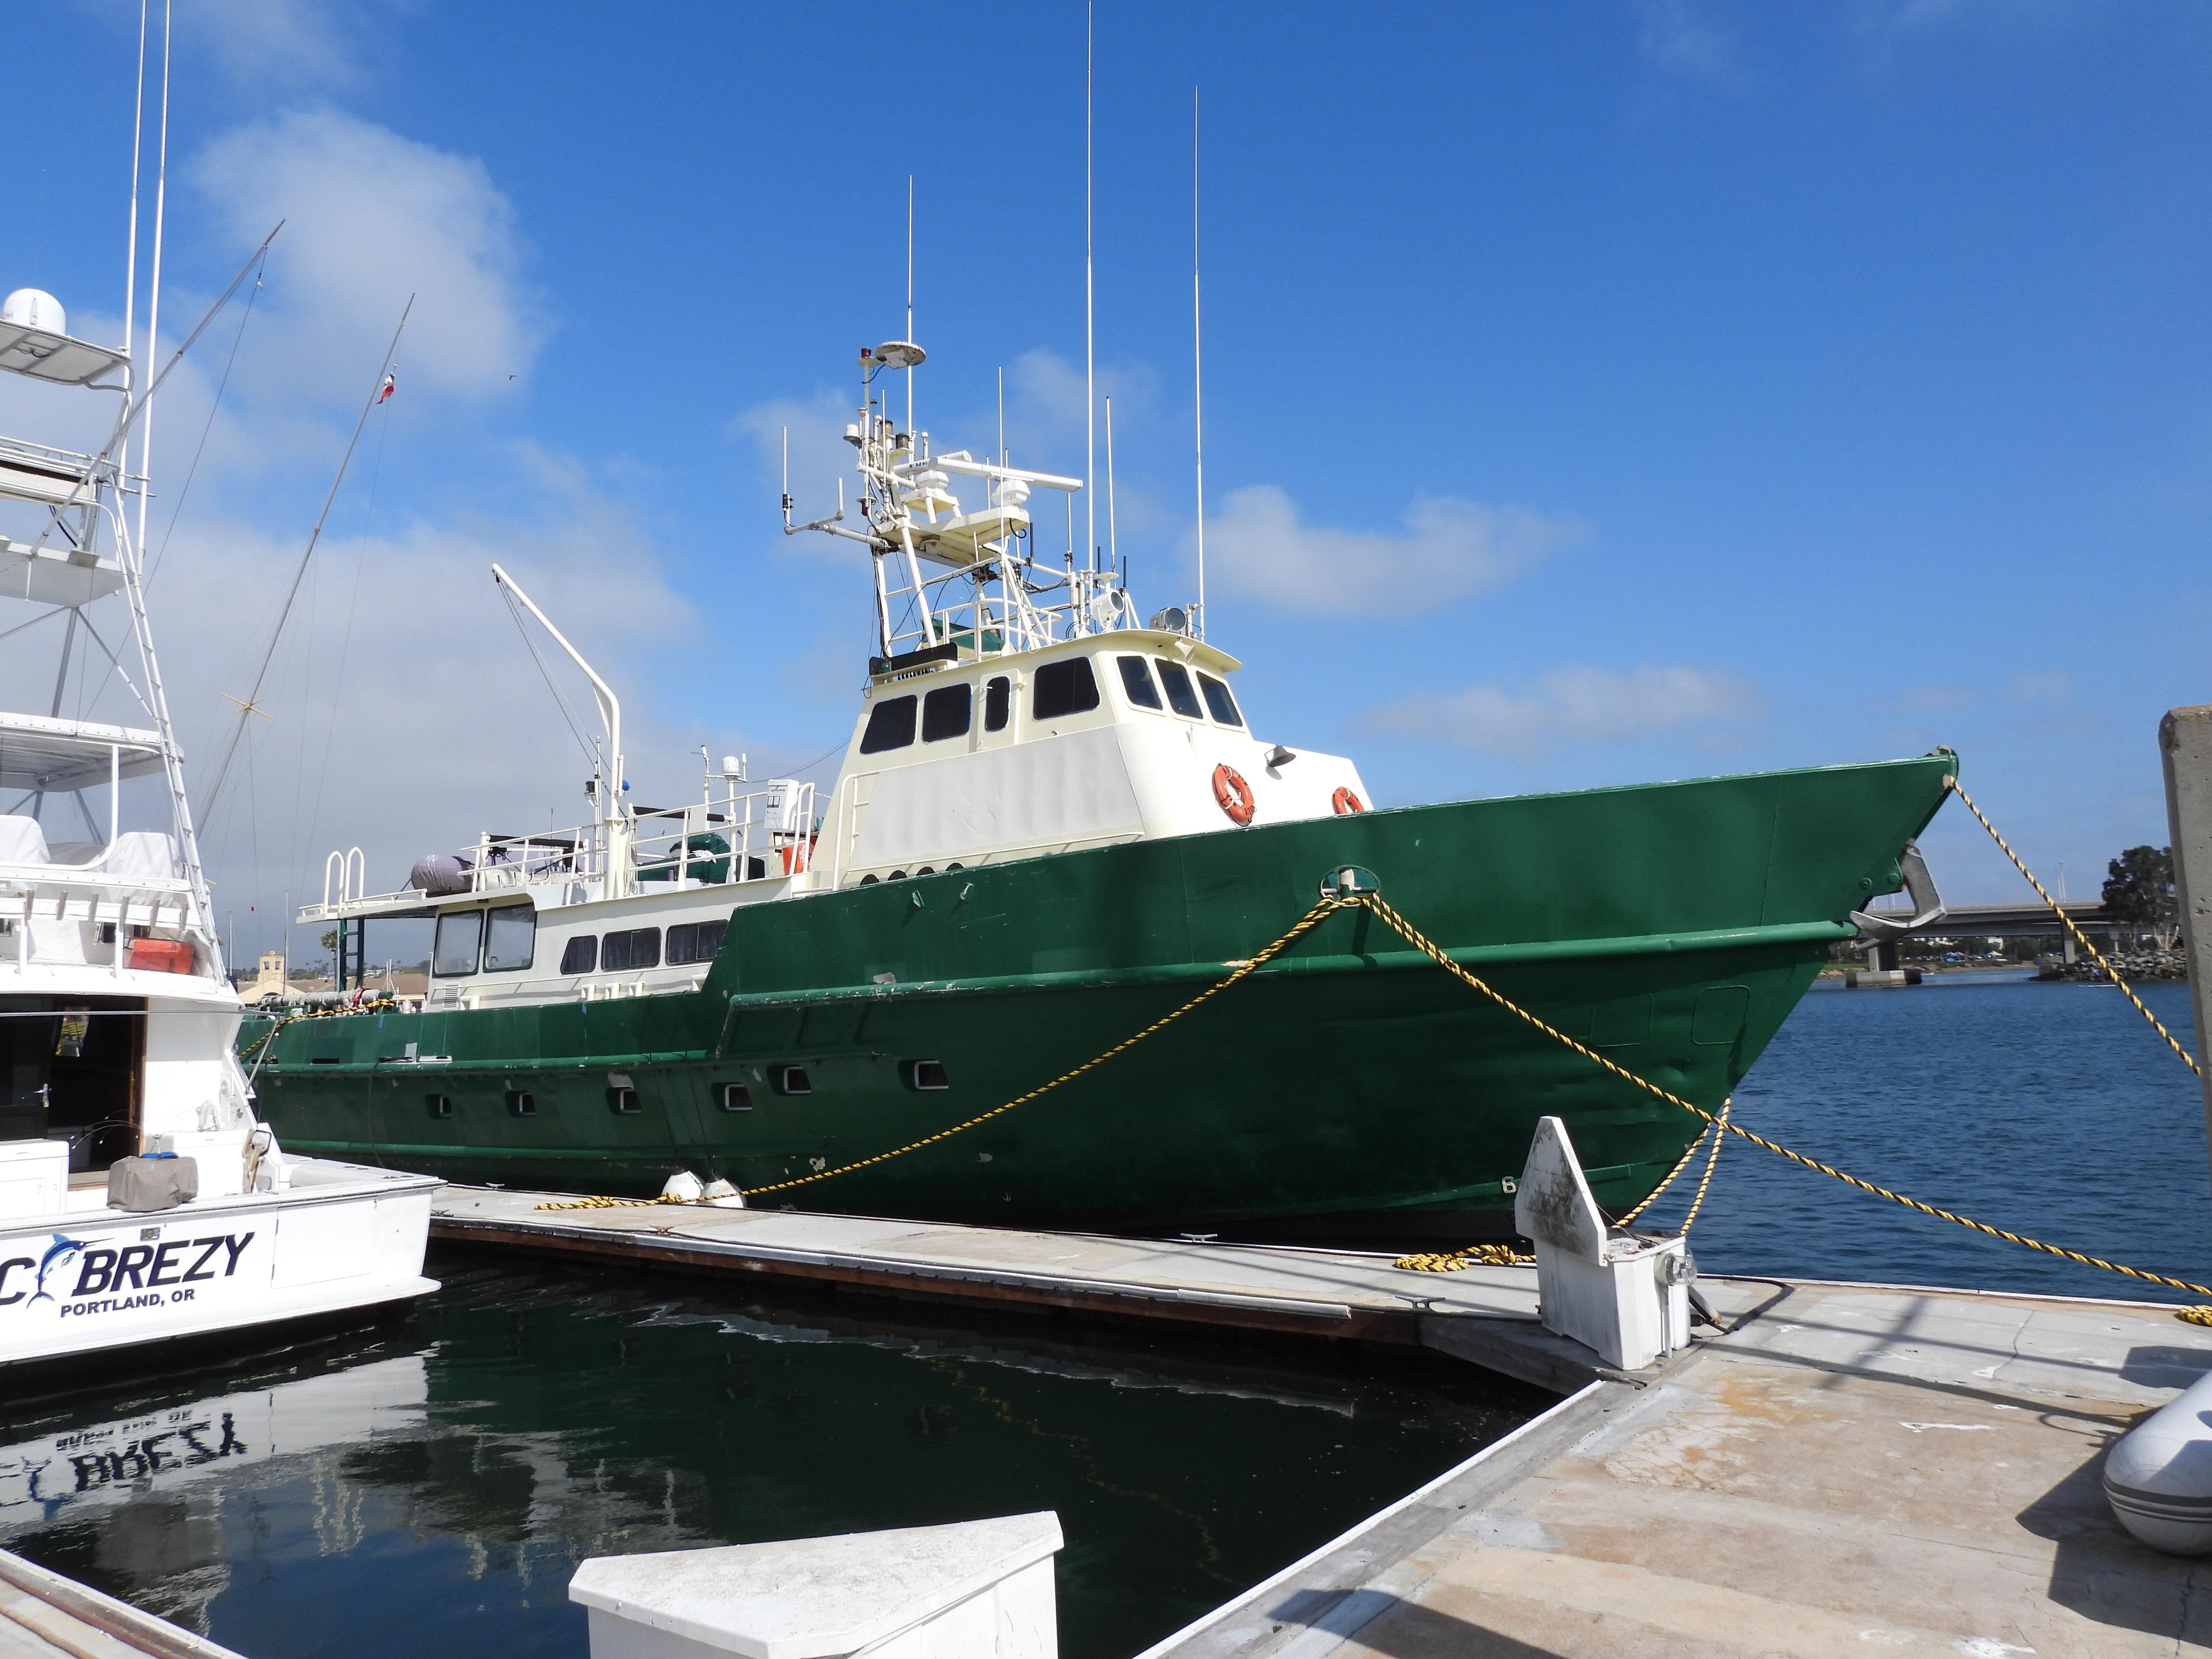 Used Unlicenced Fishing Boats For Sale, Used Unlicensed Fishing Boats For  Sale